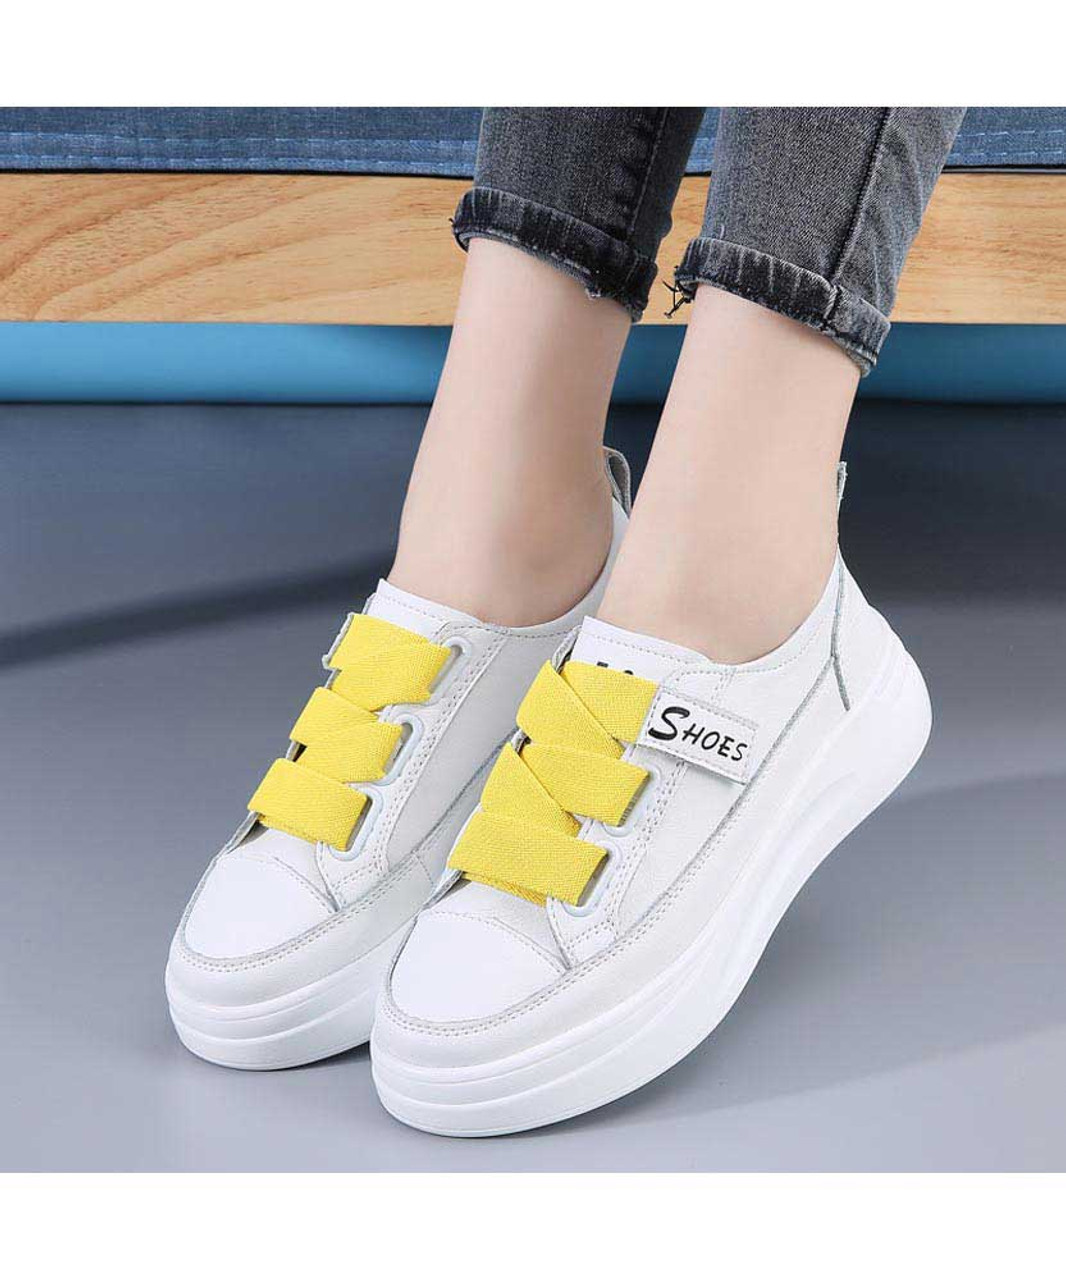 White yellow wide lace platform shoe sneaker | Womens sneakers shoes ...